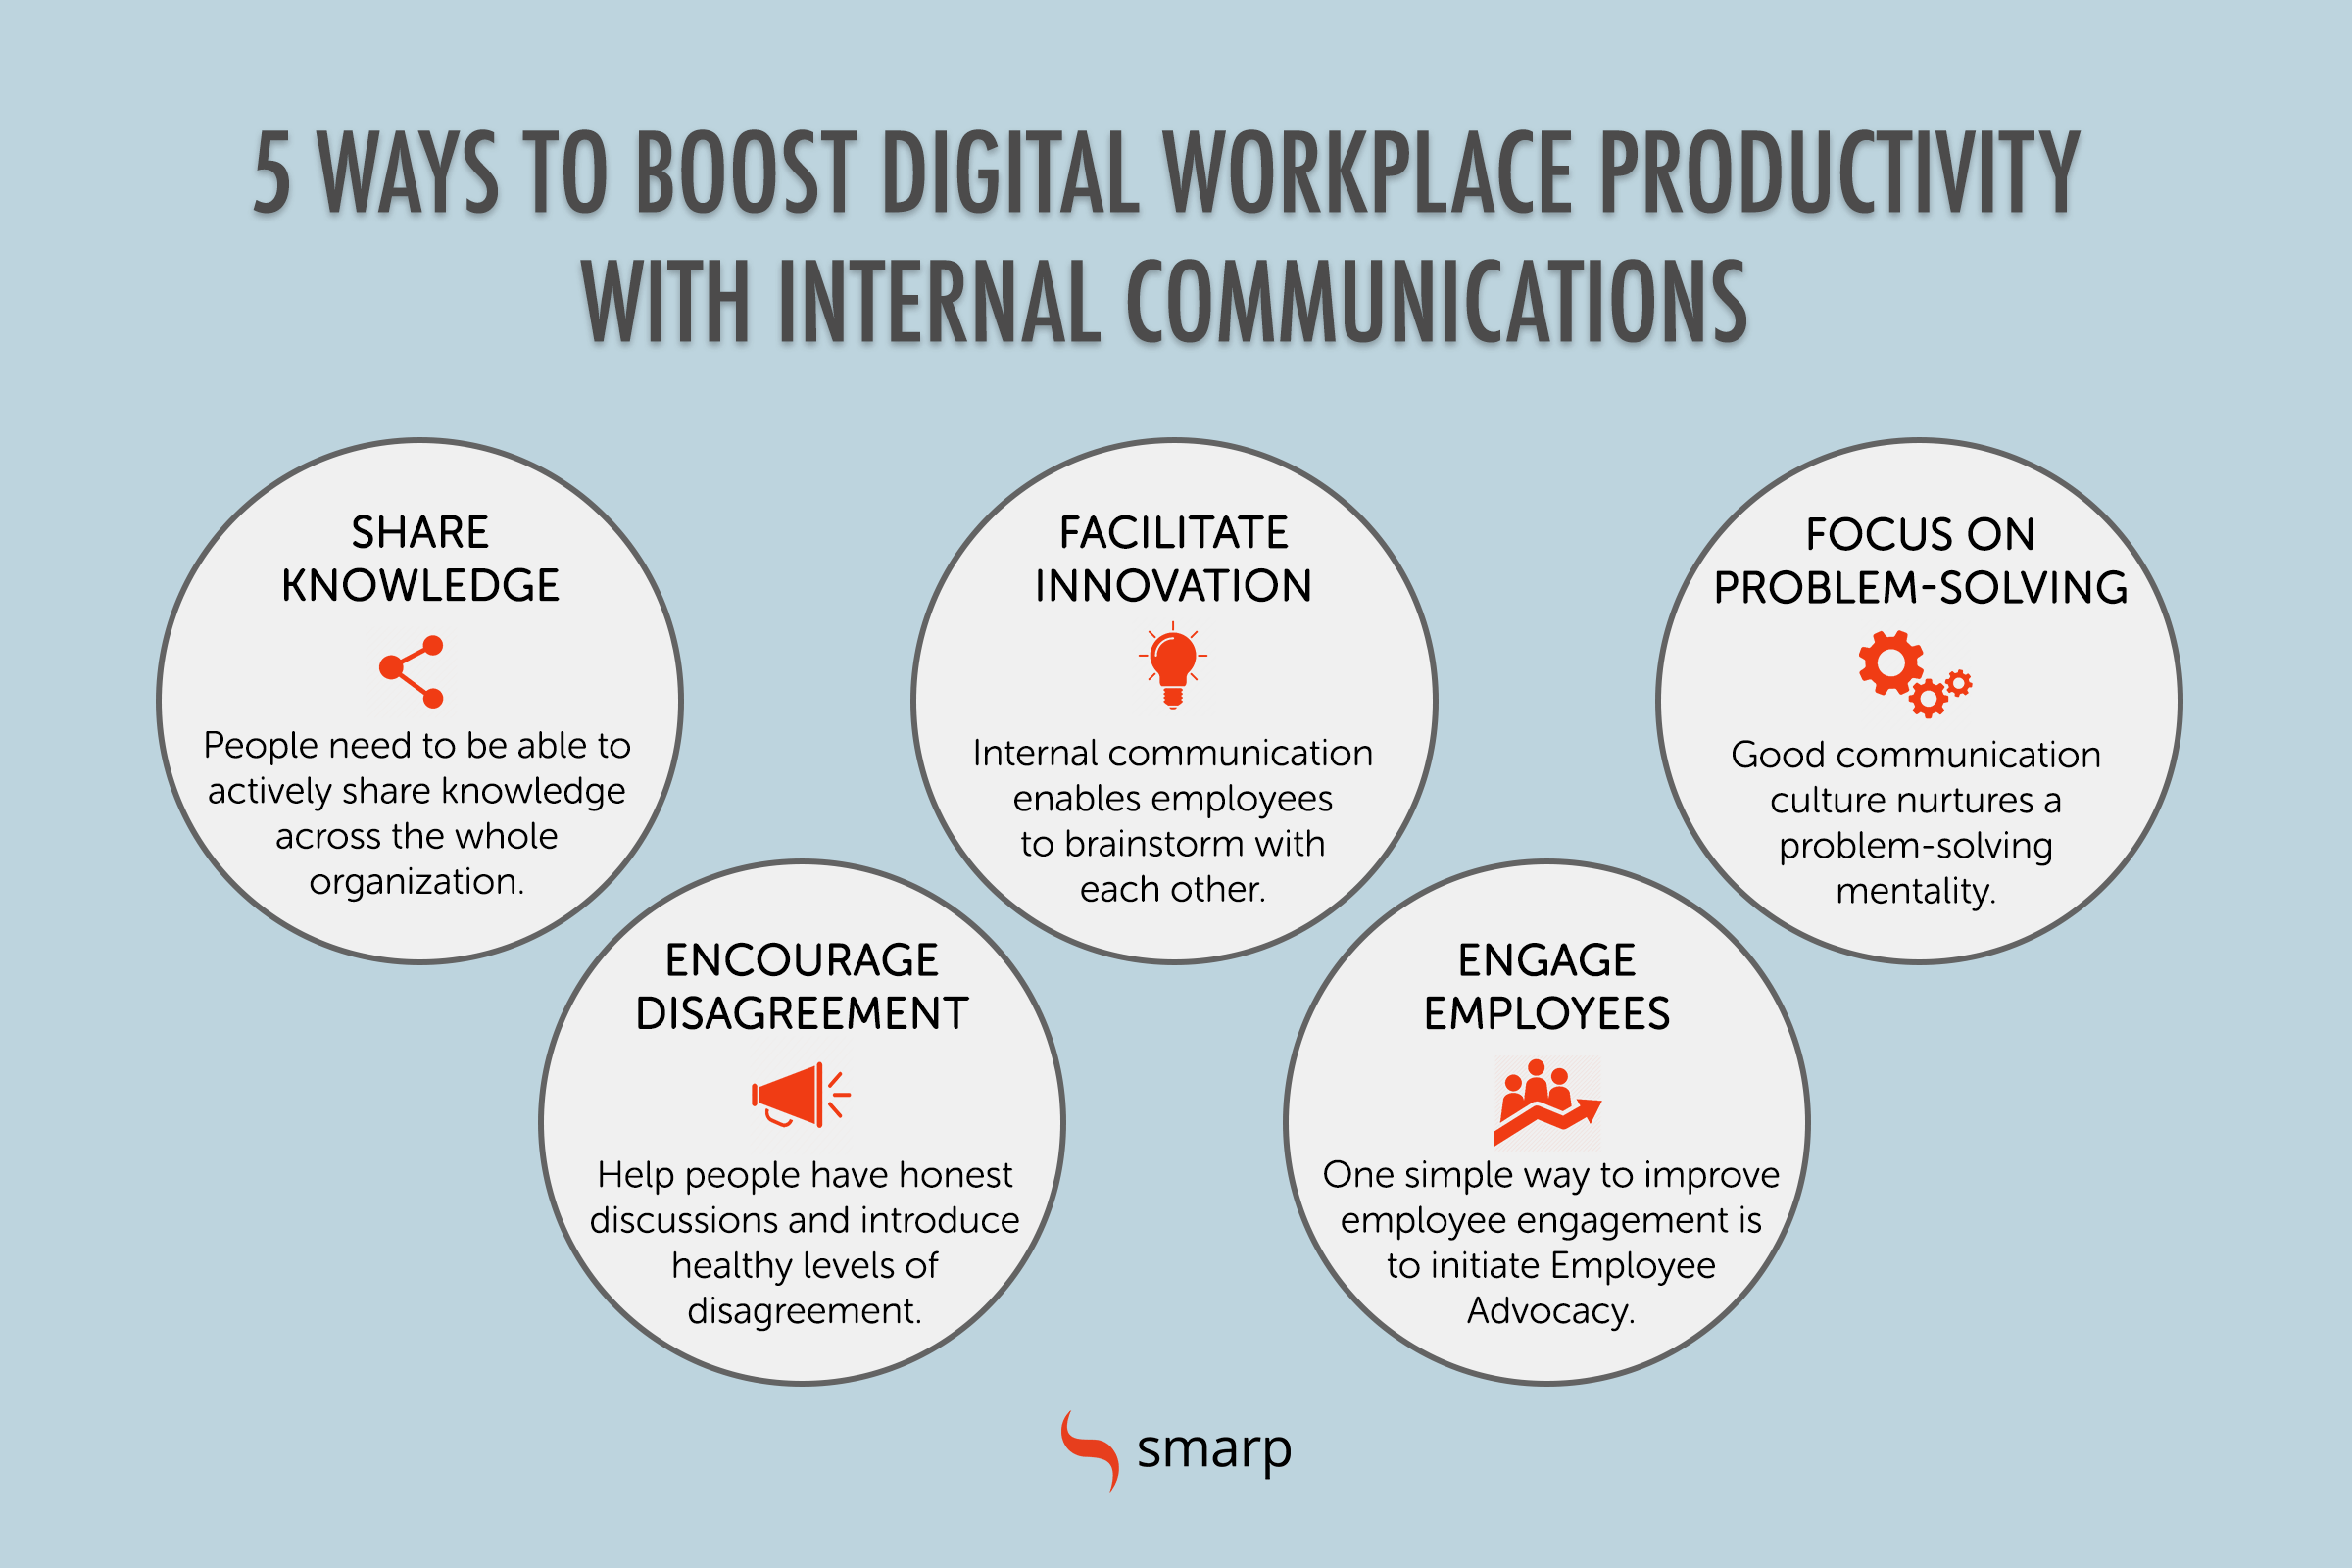 5 ways to boost digital workplace productivity with internal communications